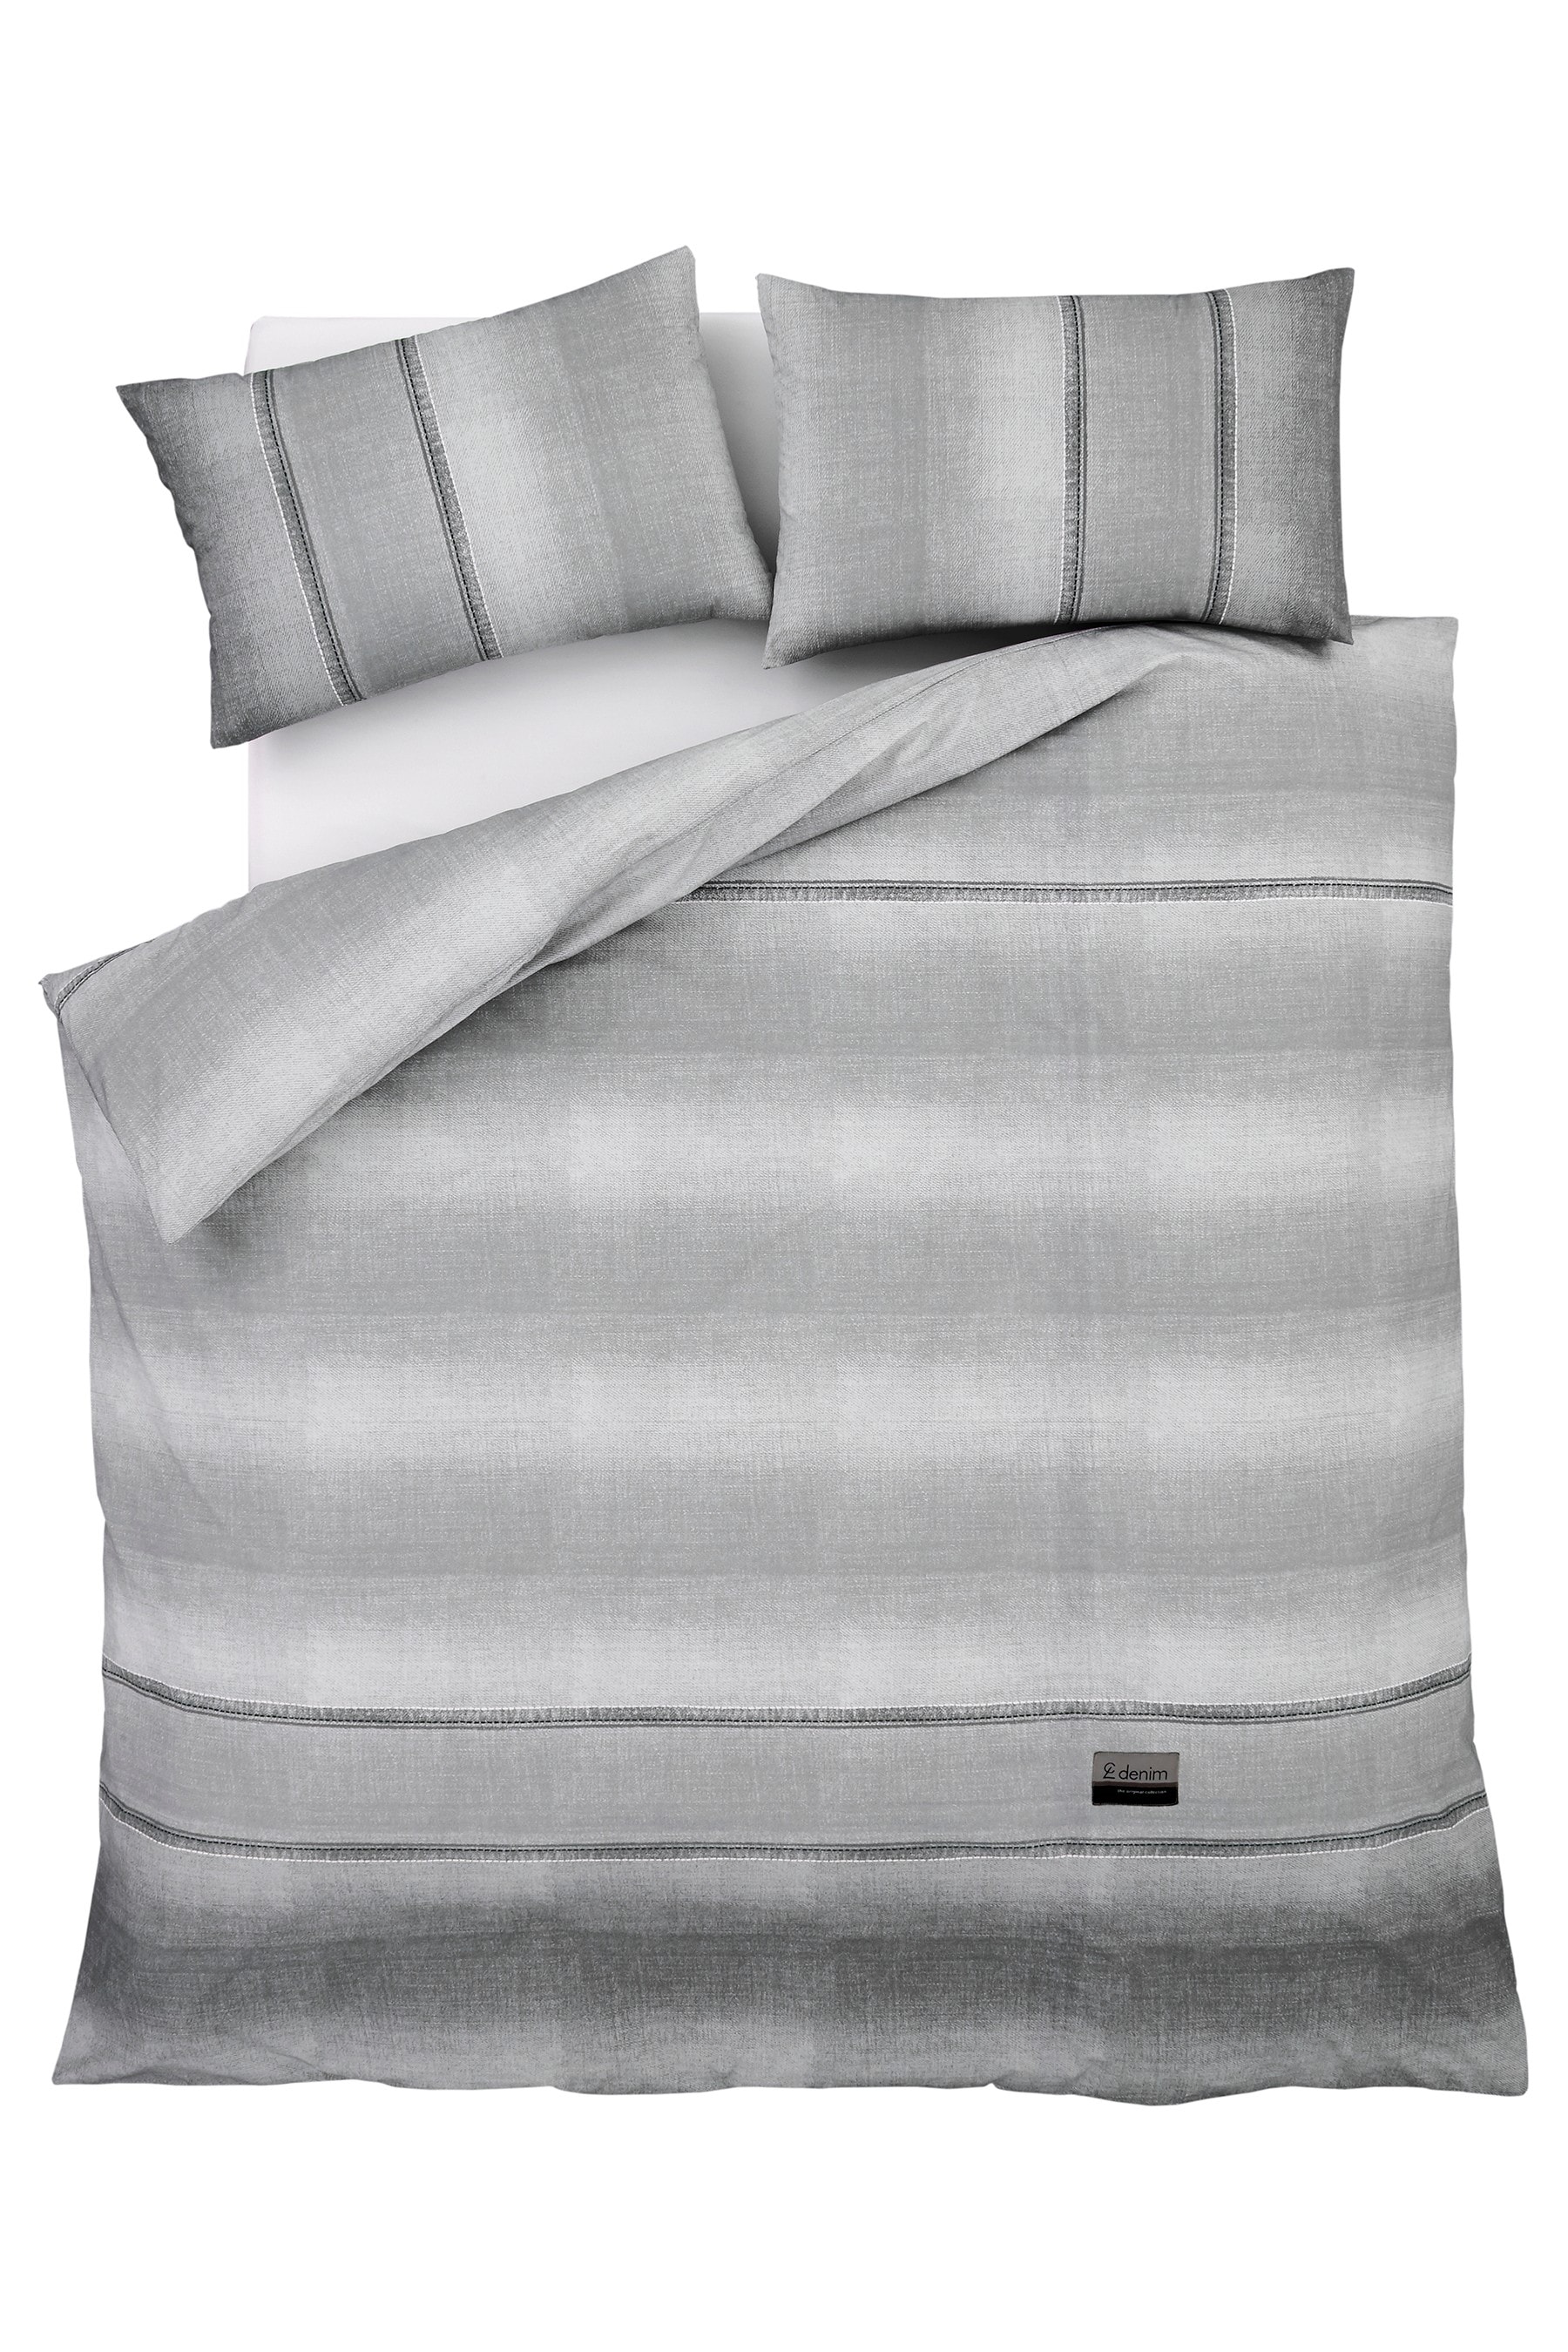 Buy Catherine Lansfield Grey Denim Duvet Cover and Pillowcase Set from ...